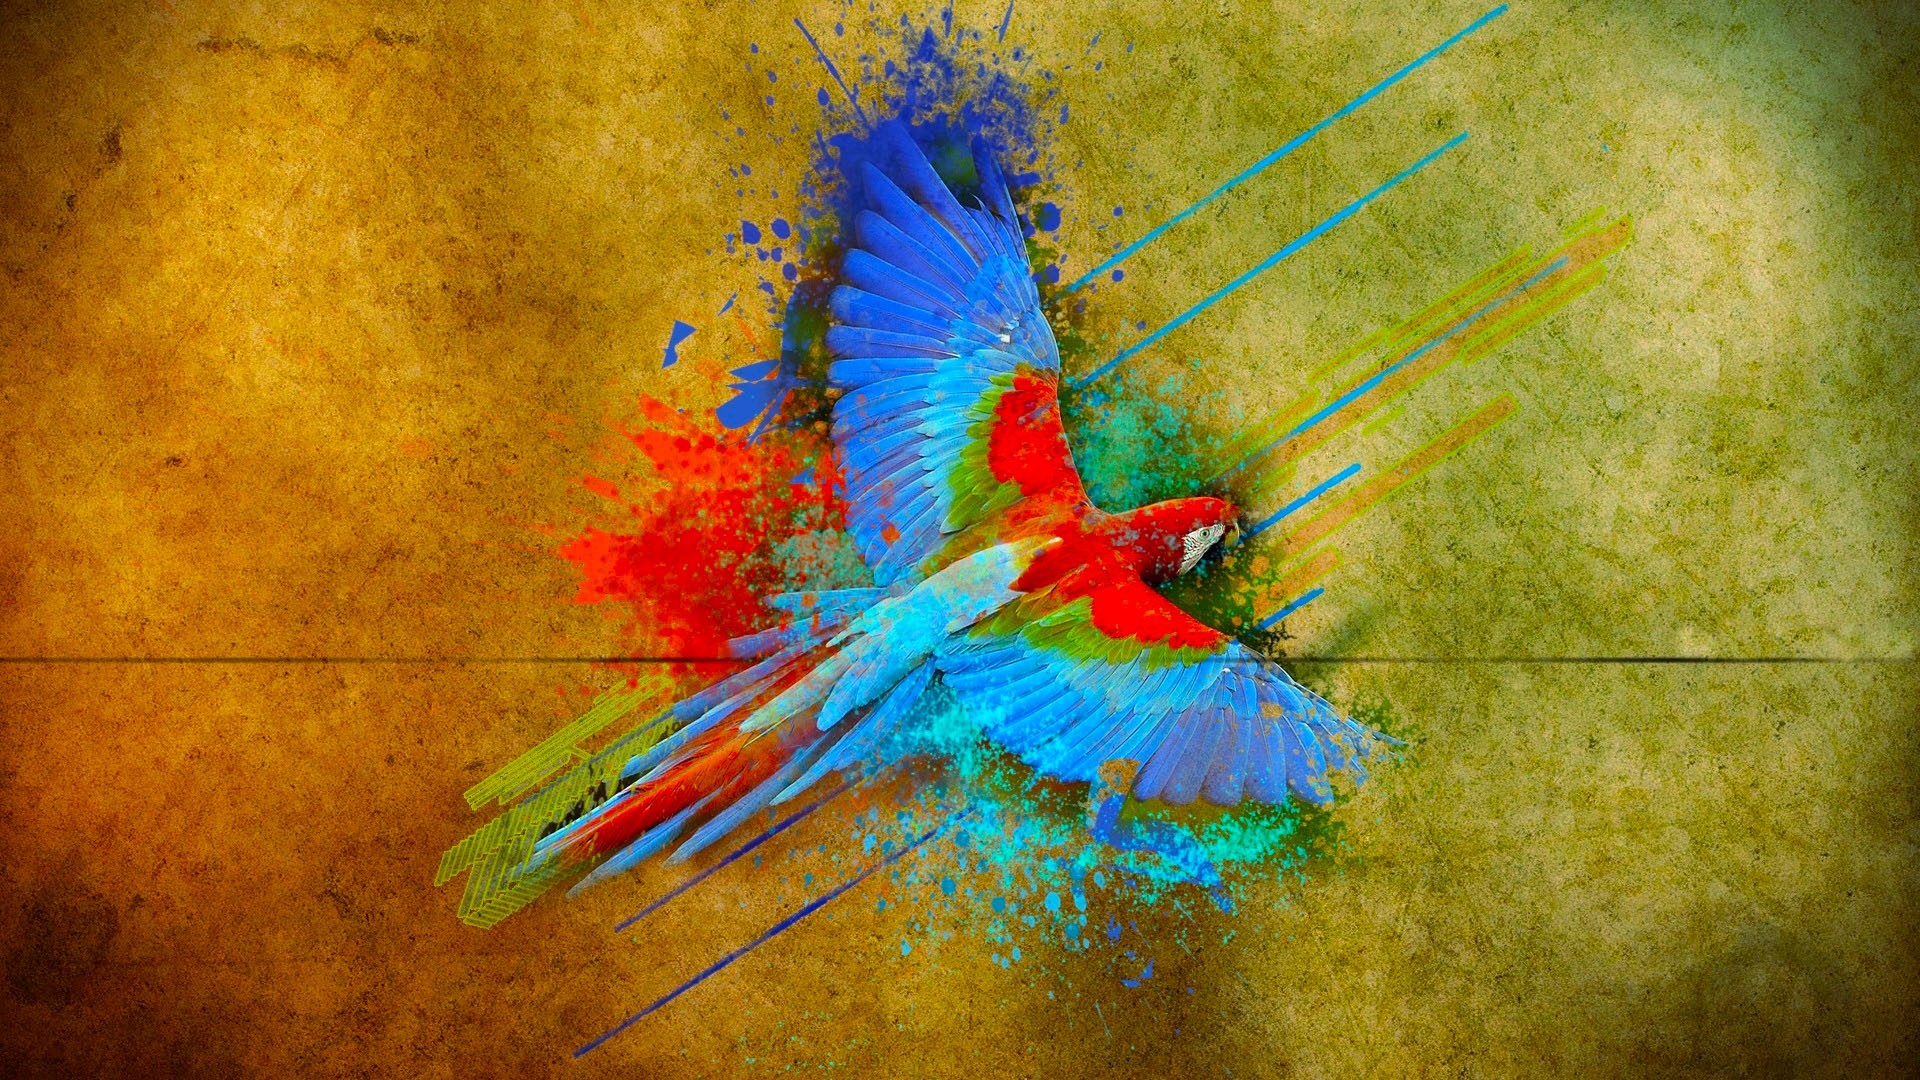 General 1920x1080 parrot birds colorful flying animals artwork